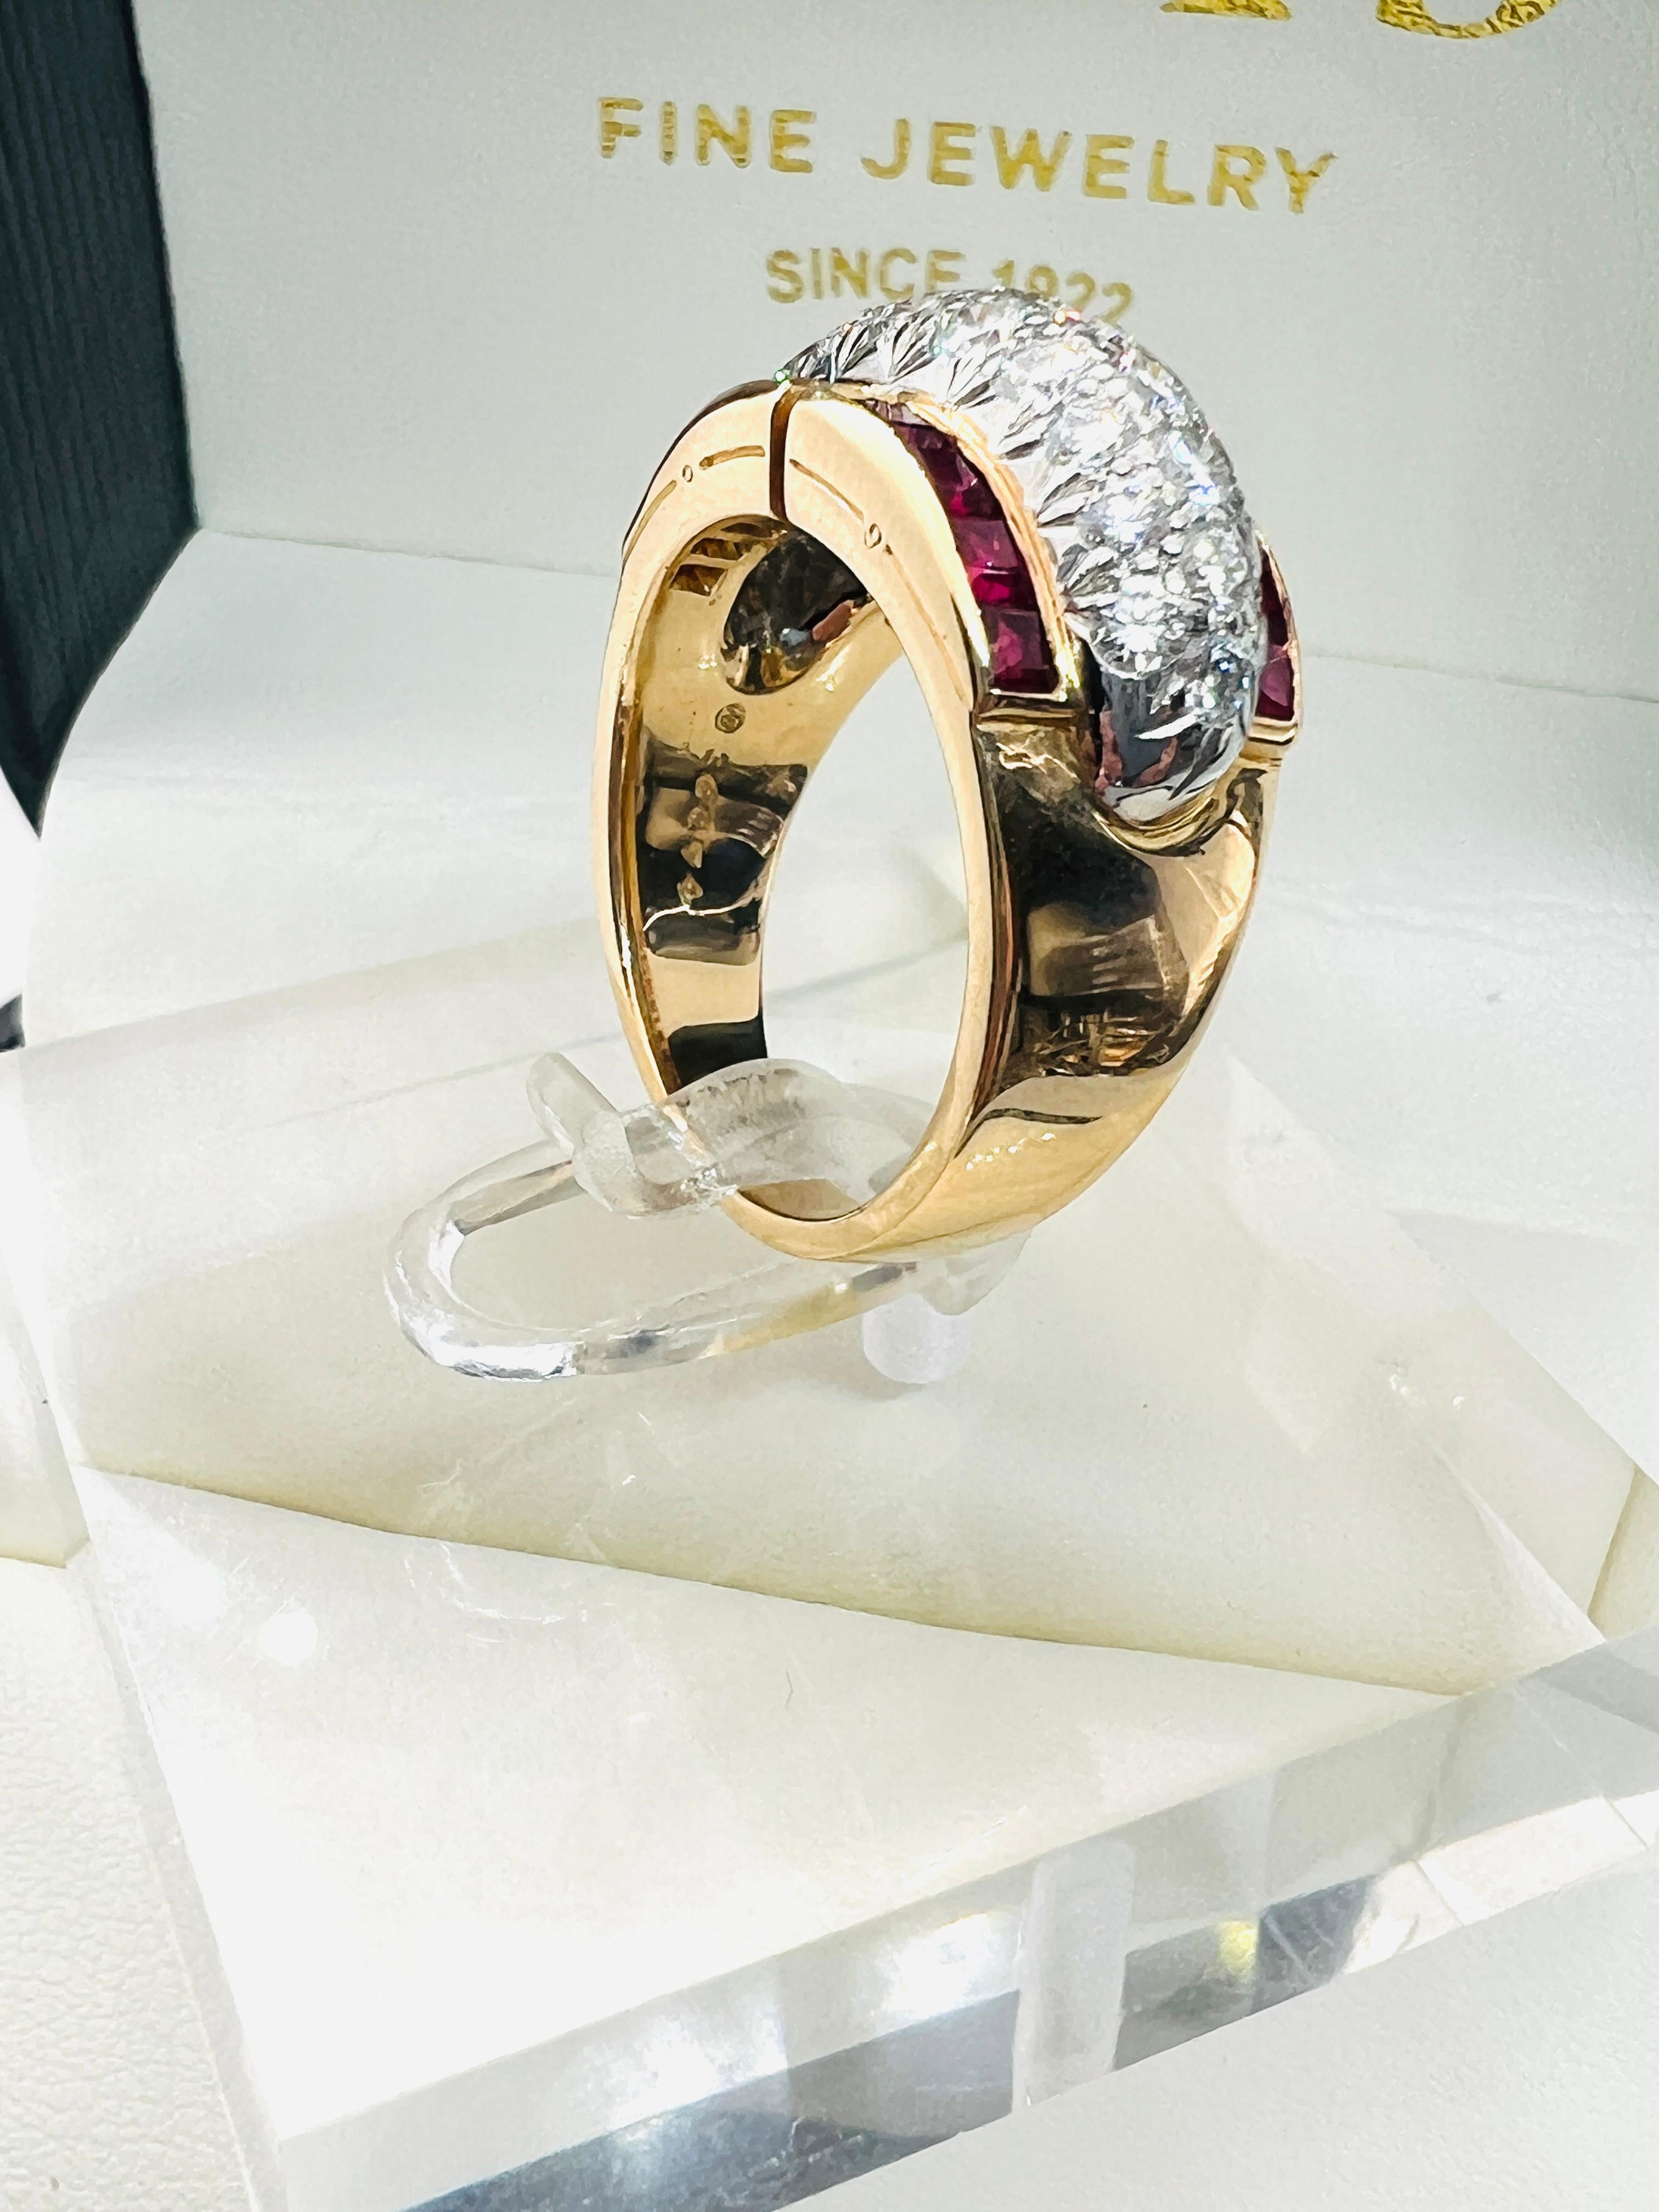 Oscar He-man Brothers Retro 18K Yellow Gold & Platinum Diamond & Ruby Ring  For Sale 4